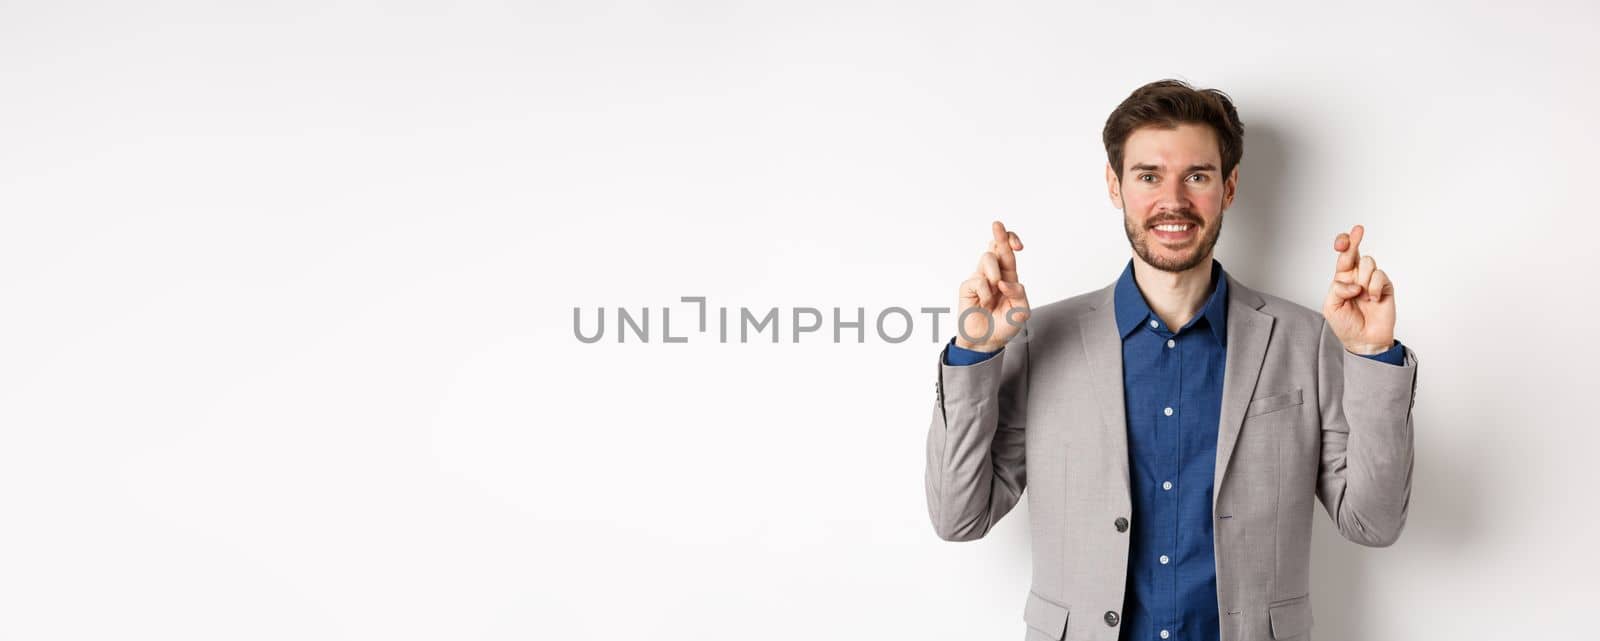 Hopeful smiling businessman looking optimistic, cross fingers good luck, praying to win, waiting for results with hope, standing on white background.